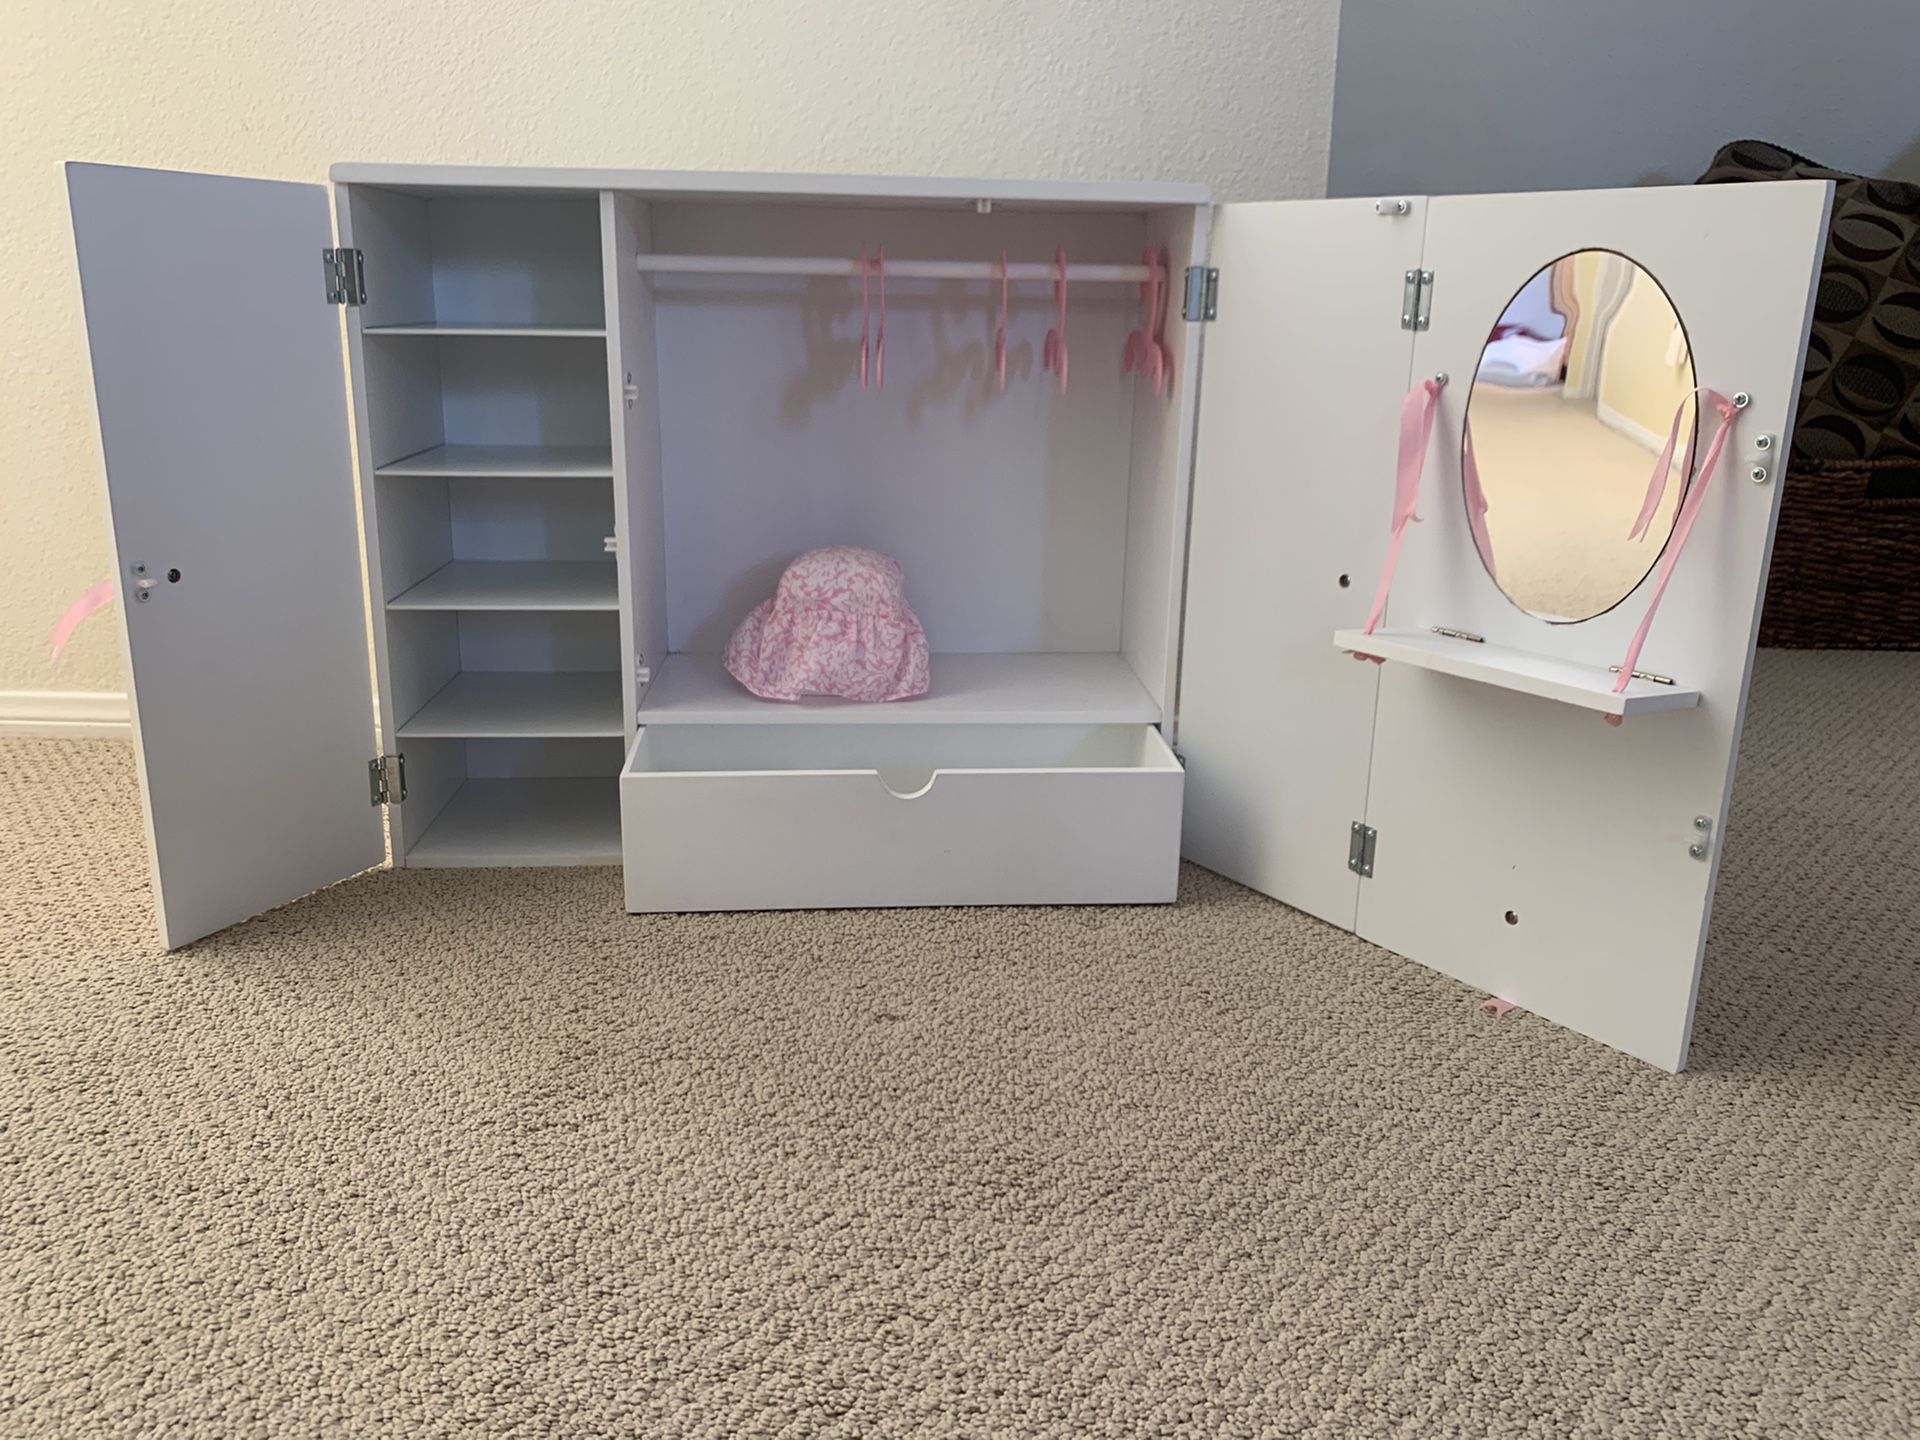 wardrobe closet for American Girl dolls from TARGET.